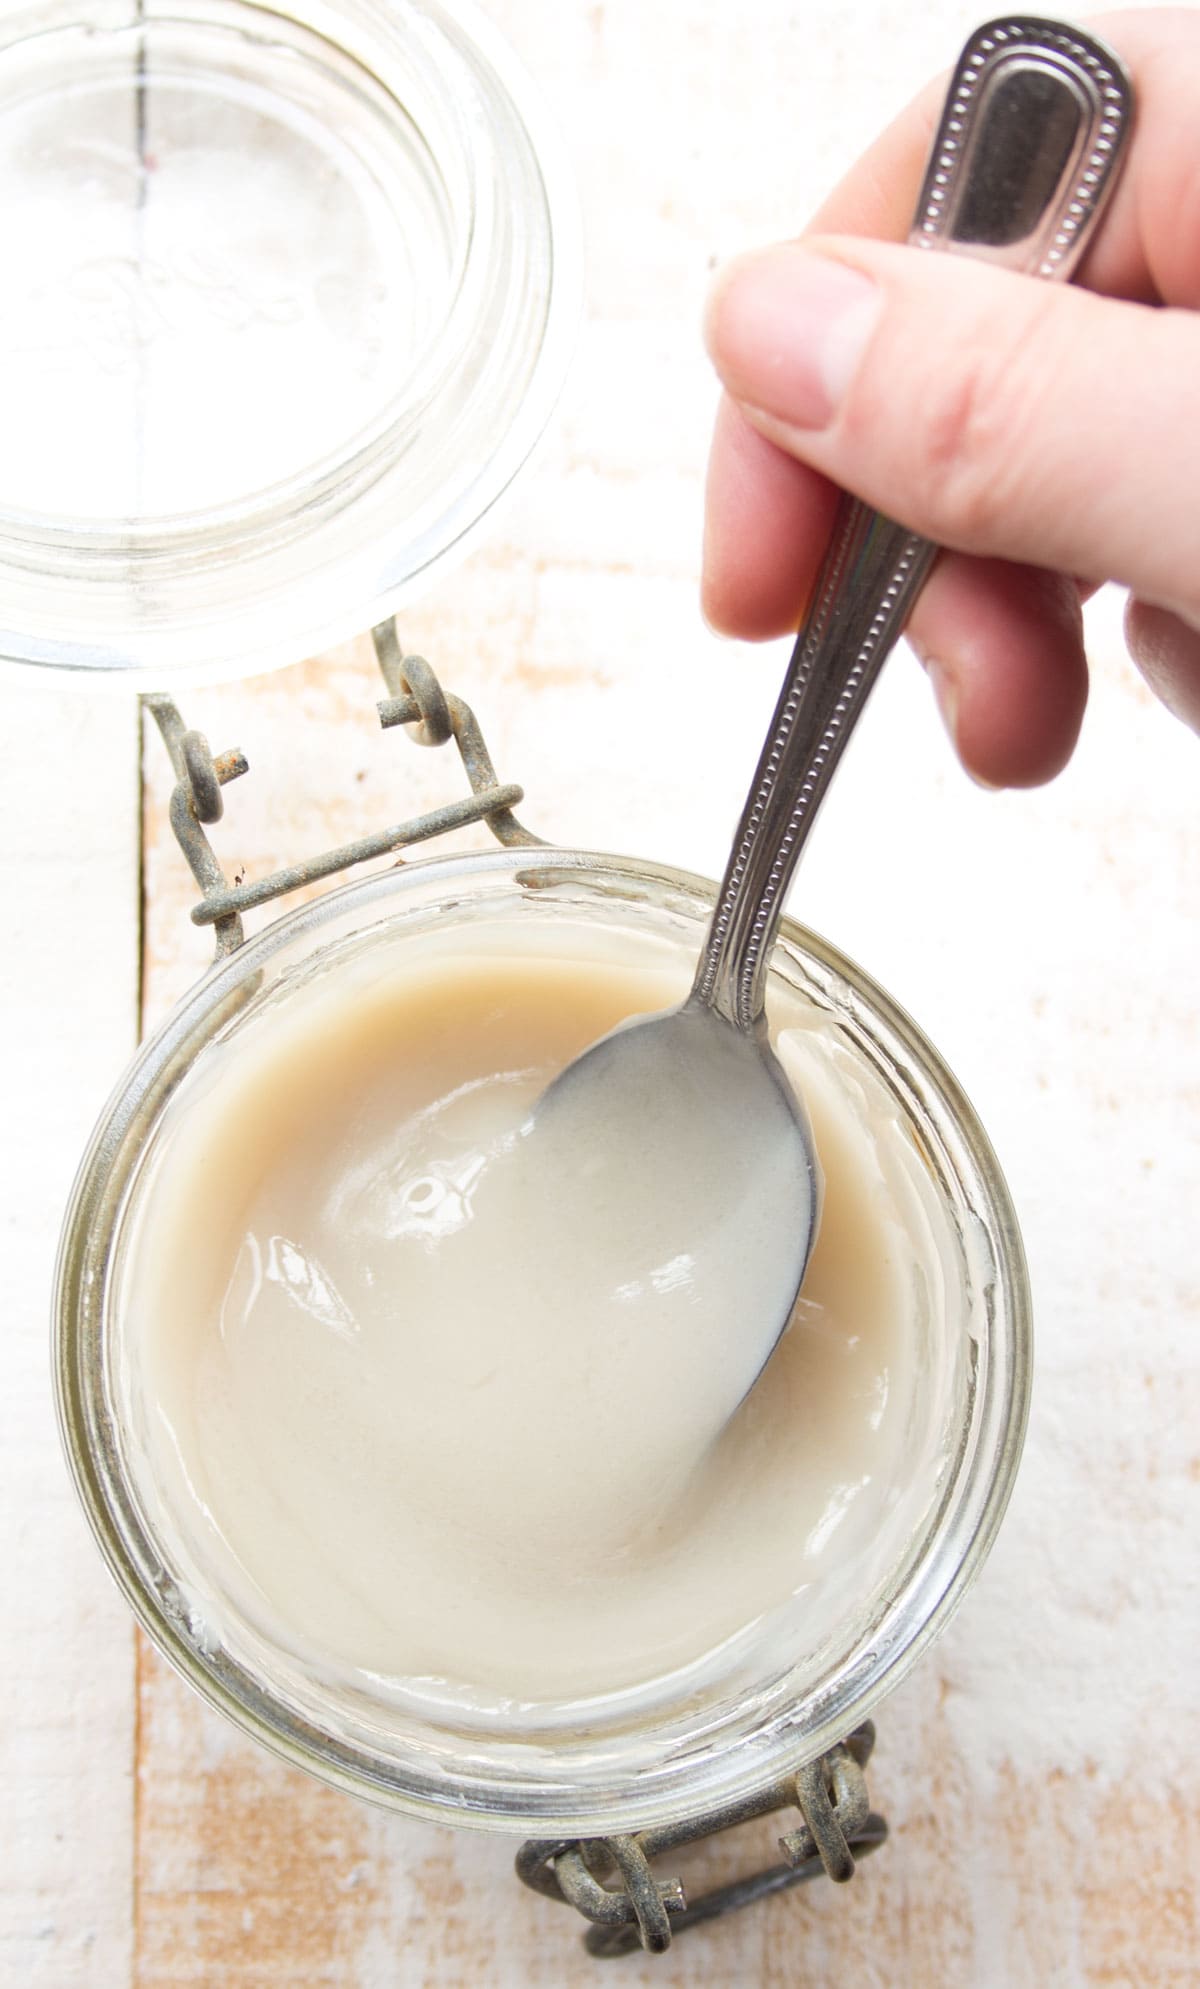 Sticking a spoon into a jar with condensed milk.